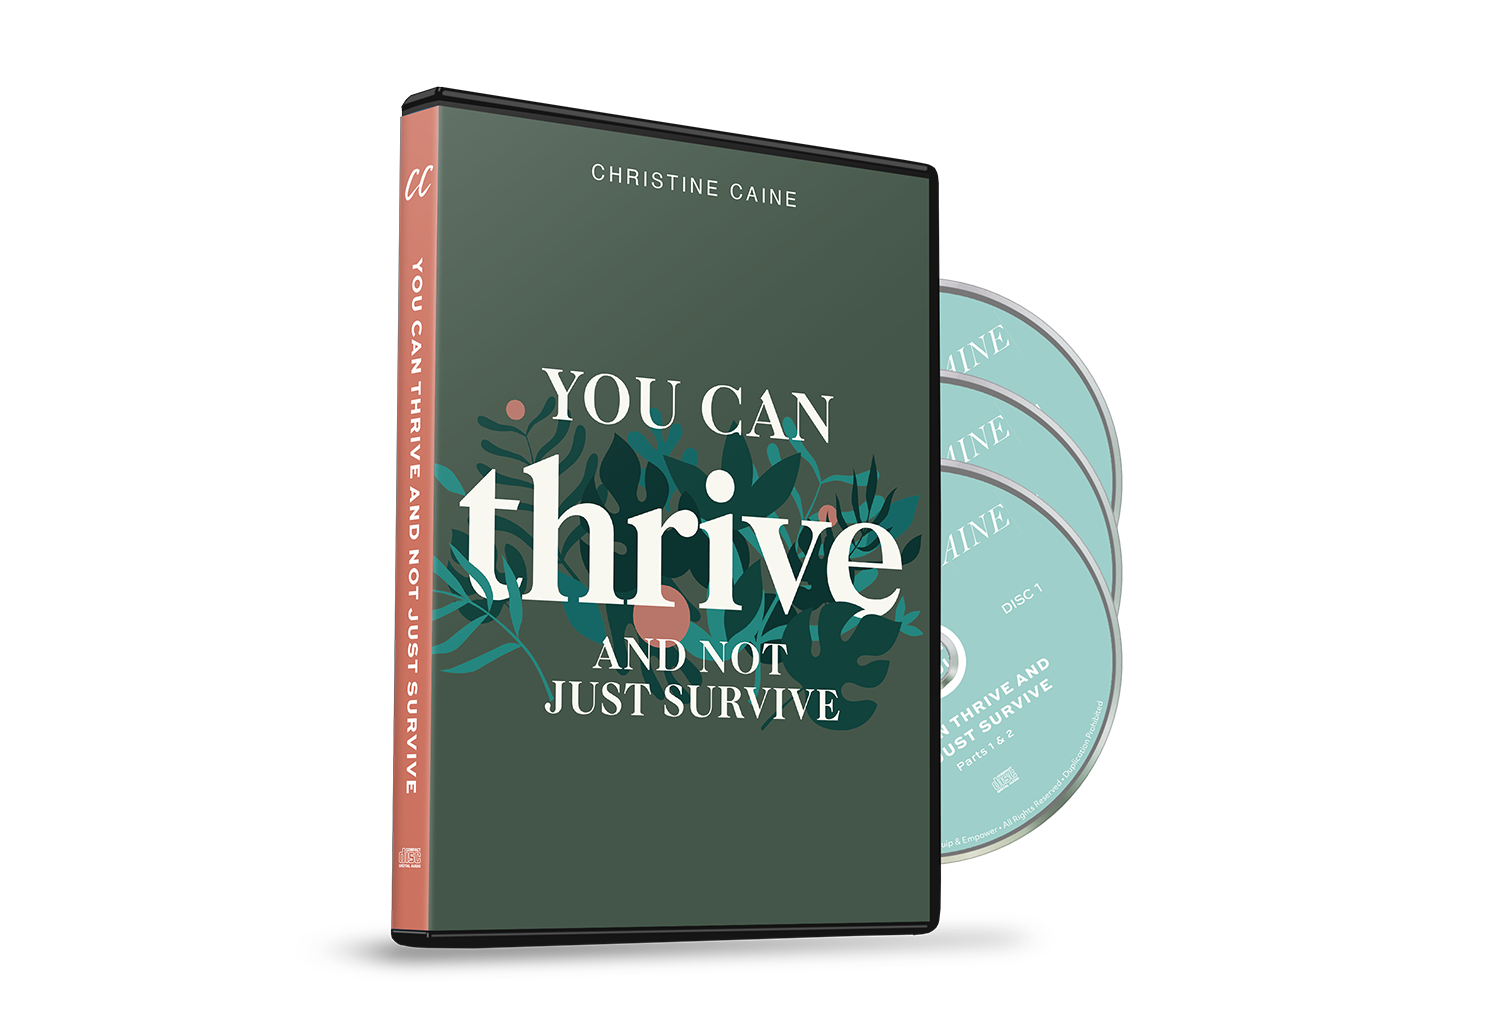 Christine Caine's You Can Thrive, and Not Just Survive on TBN